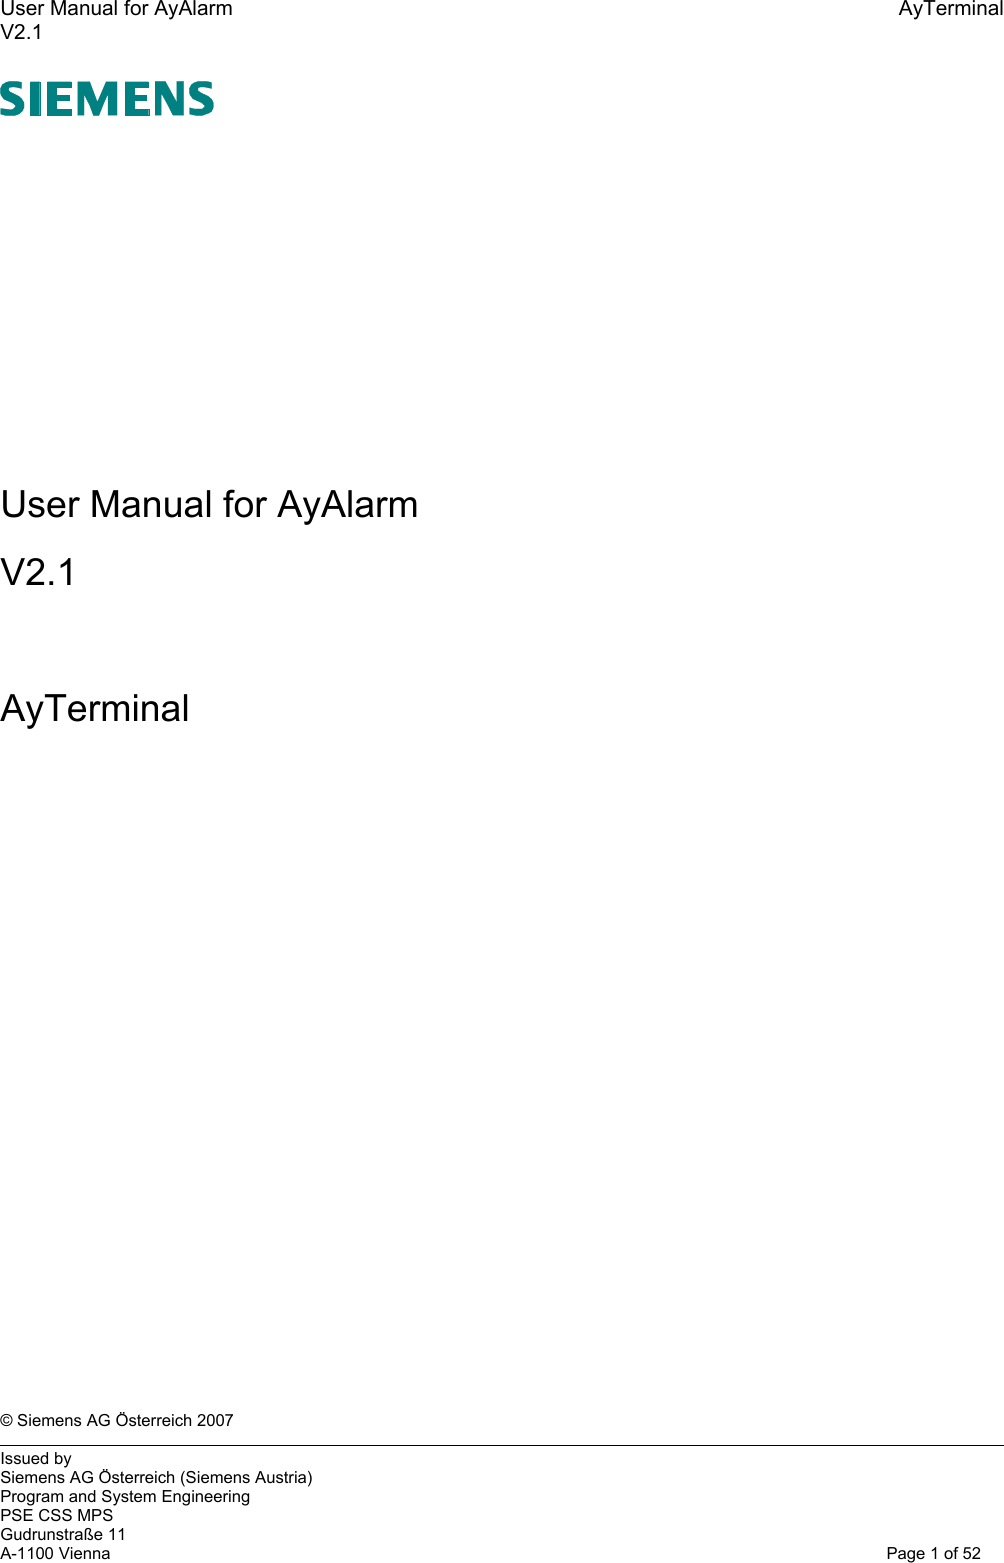 User Manual for AyAlarm AyTerminalV2.1User Manual for AyAlarmV2.1AyTerminal© Siemens AG Österreich 2007Issued bySiemens AG Österreich (Siemens Austria)Program and System EngineeringPSE CSS MPSGudrunstraße 11A-1100 Vienna Page 1 of 52